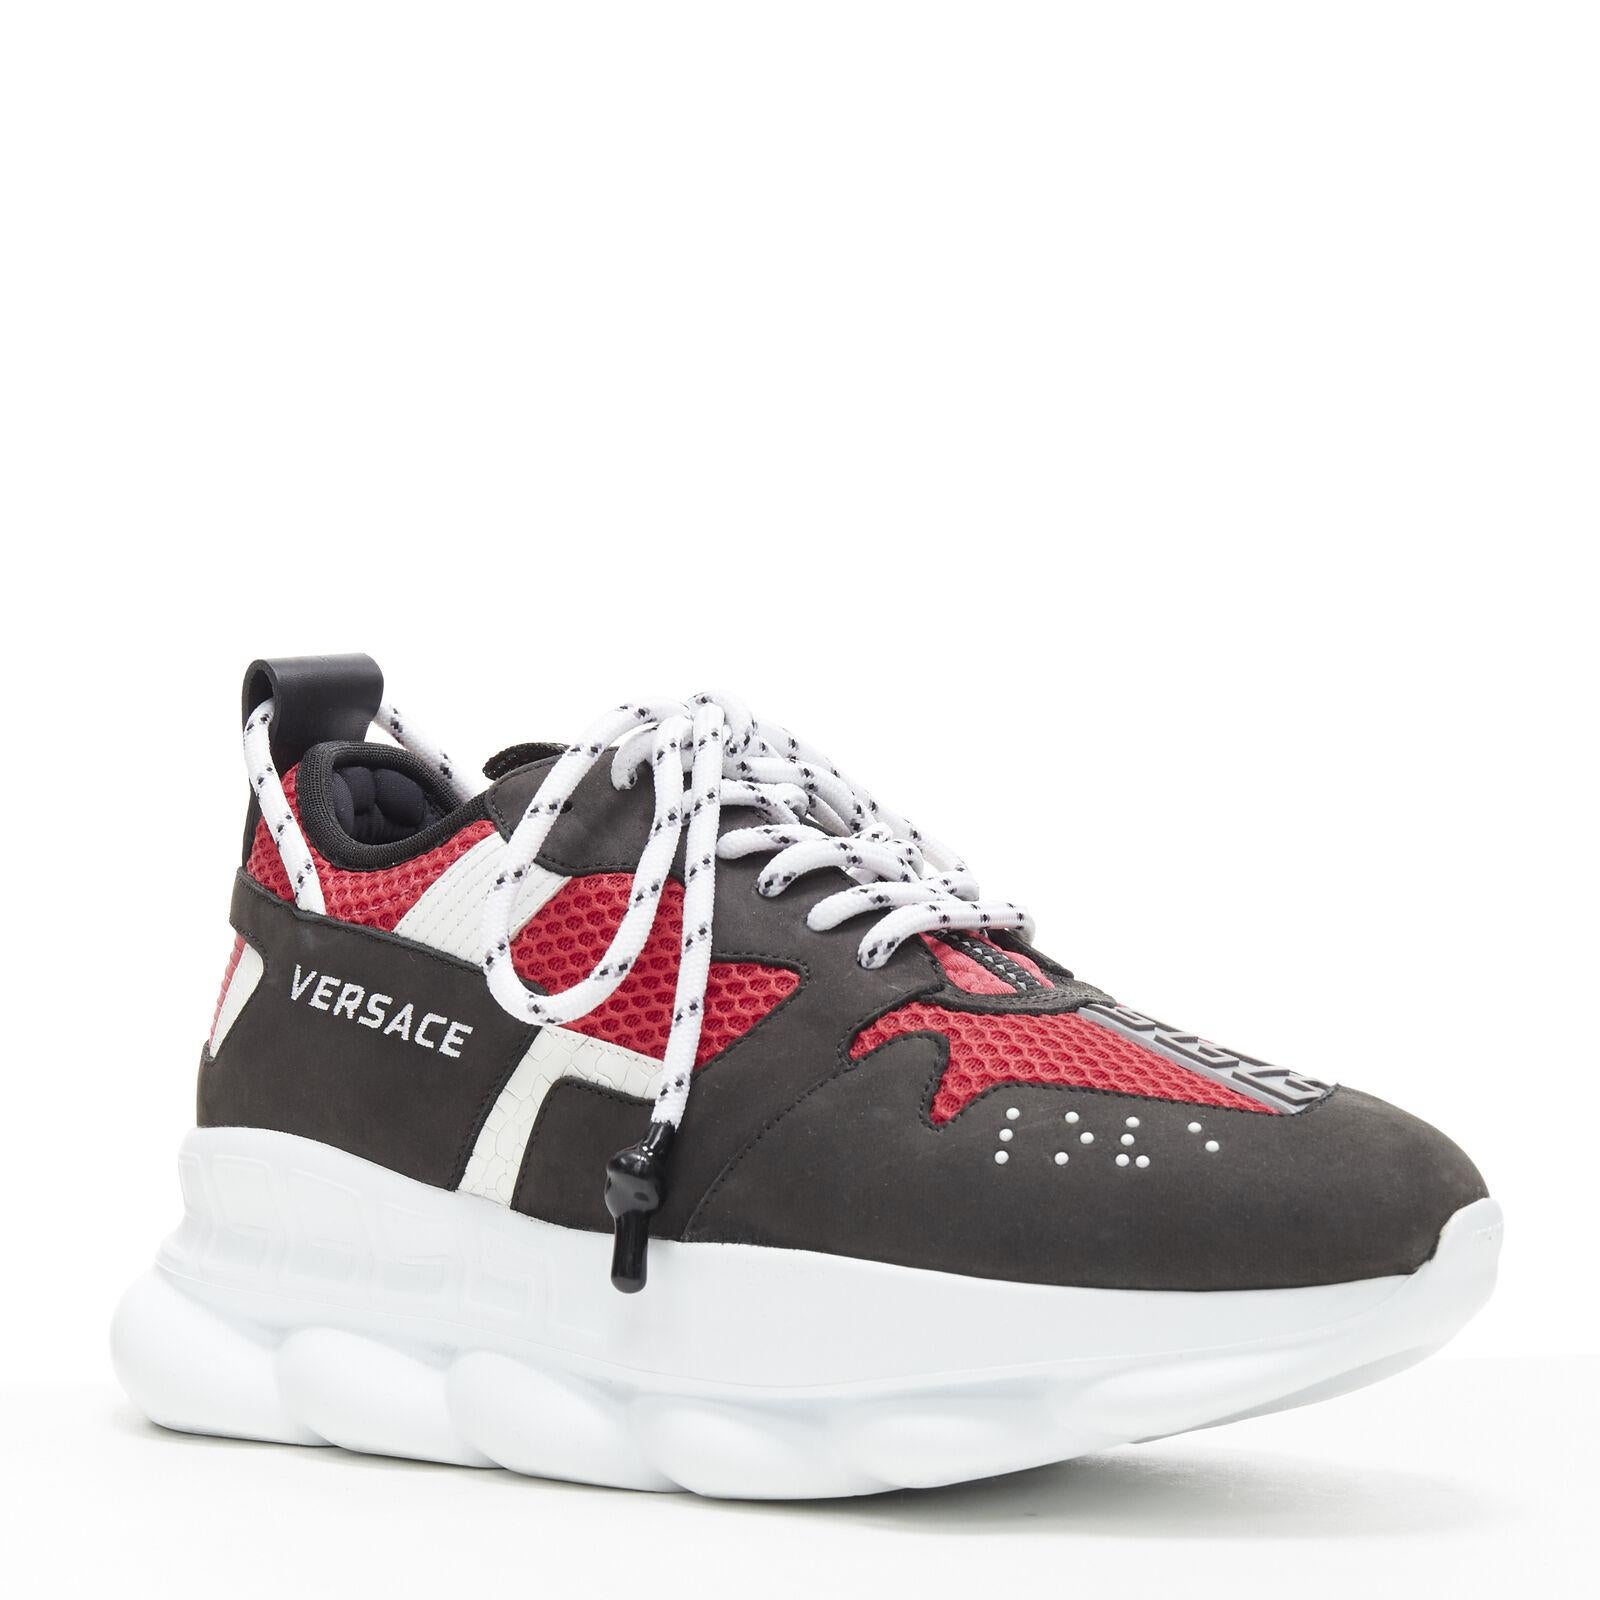 new VERSACE Chain Reaction Black Red suede low top chunky sneaker EU38 US5
Reference: TGAS/B01153
Brand: Versace
Designer: Donatella Versace
Model: Versace Chain Reaction
Material: Fabric, Leather
Color: Black, Red
Pattern: Solid
Closure: Lace